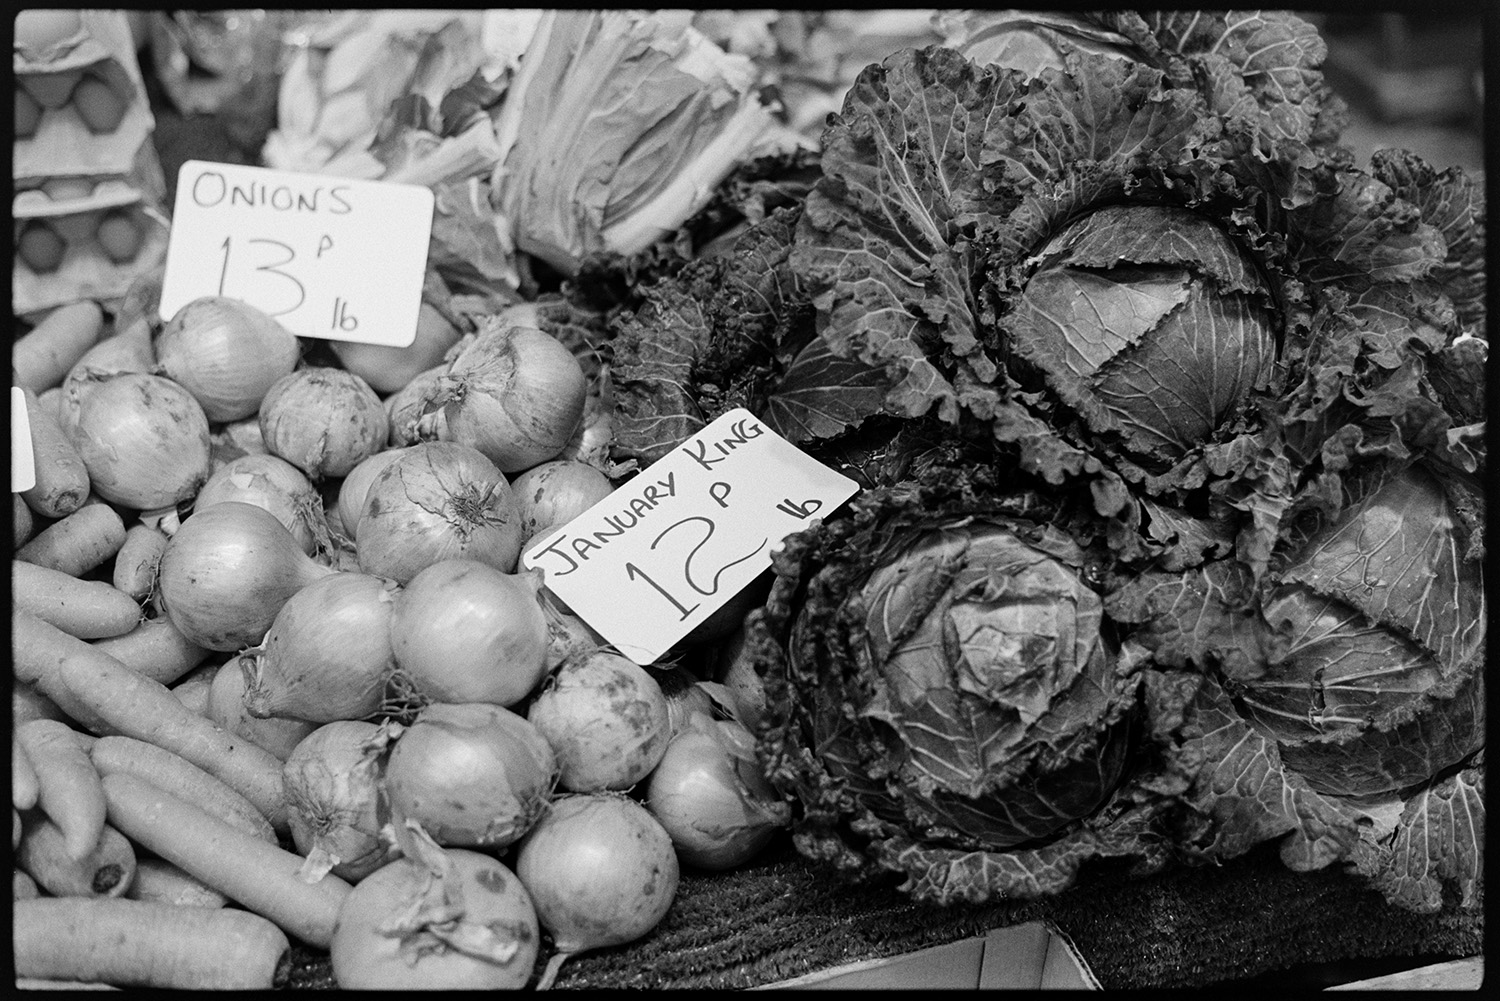 Pannier market, vegetables on display, cabbages, leeks, basket.
[Onions, carrots and January King cabbages on sale at Barnstaple Pannier Market. Price tags are displayed with the vegetables.]